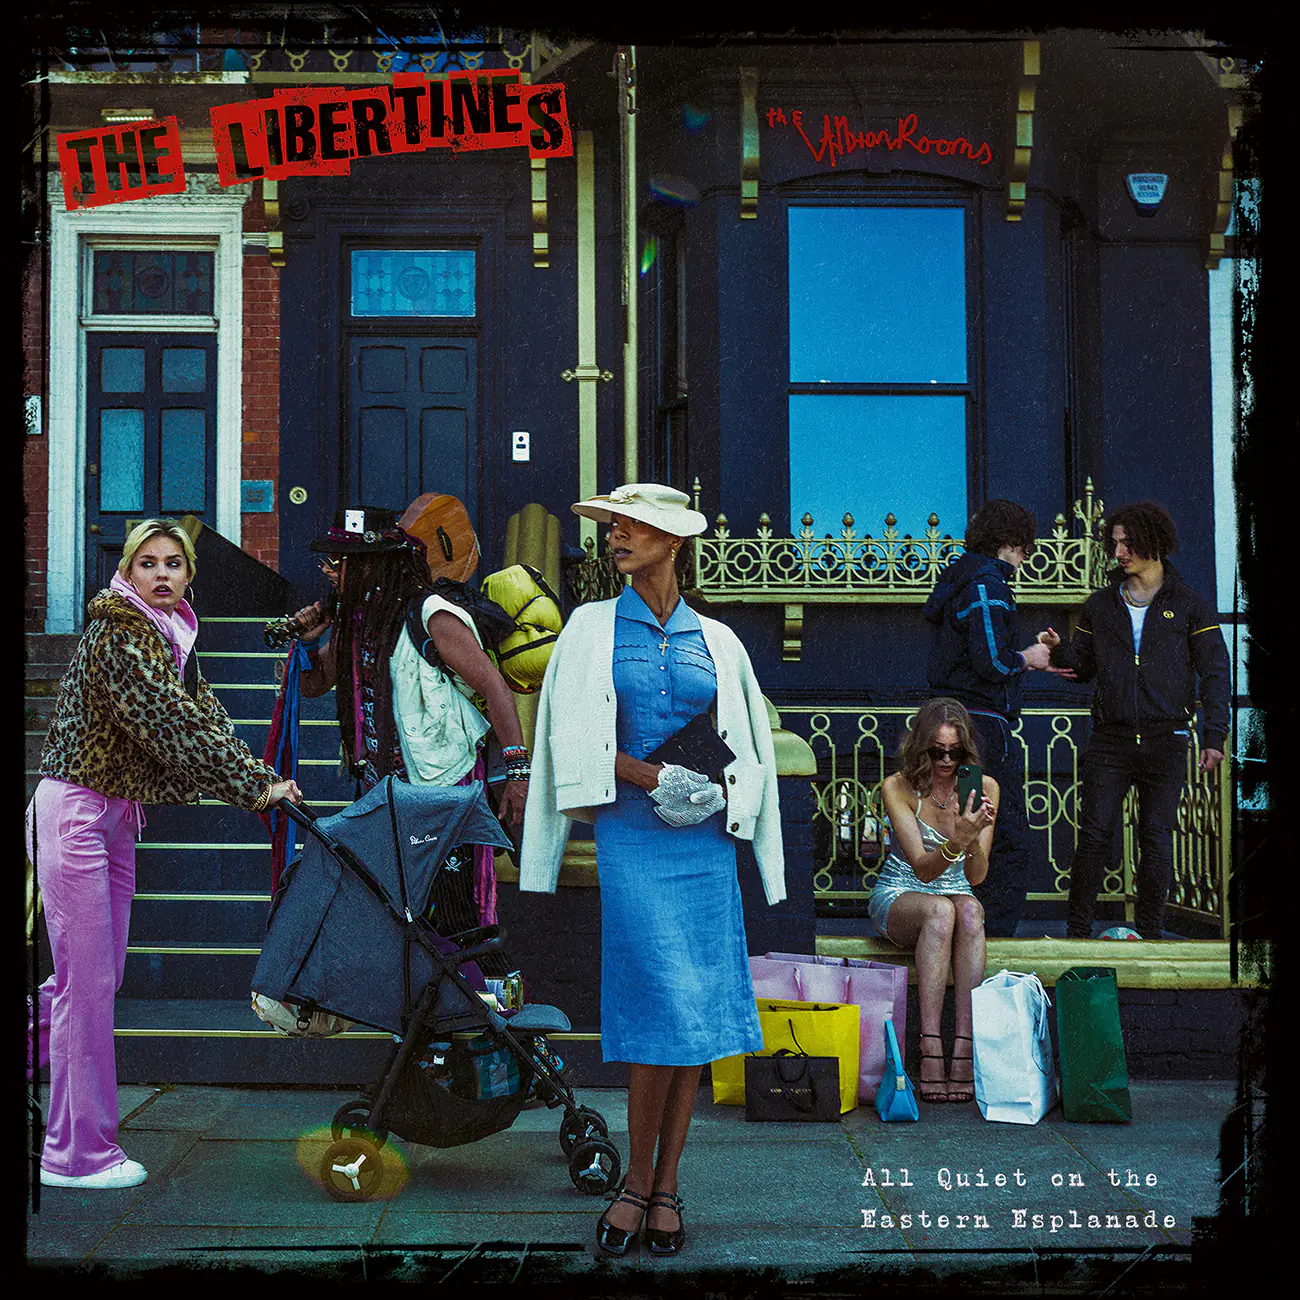 ALBUM REVIEW: The Libertines – All Quiet On The Eastern Esplanade  